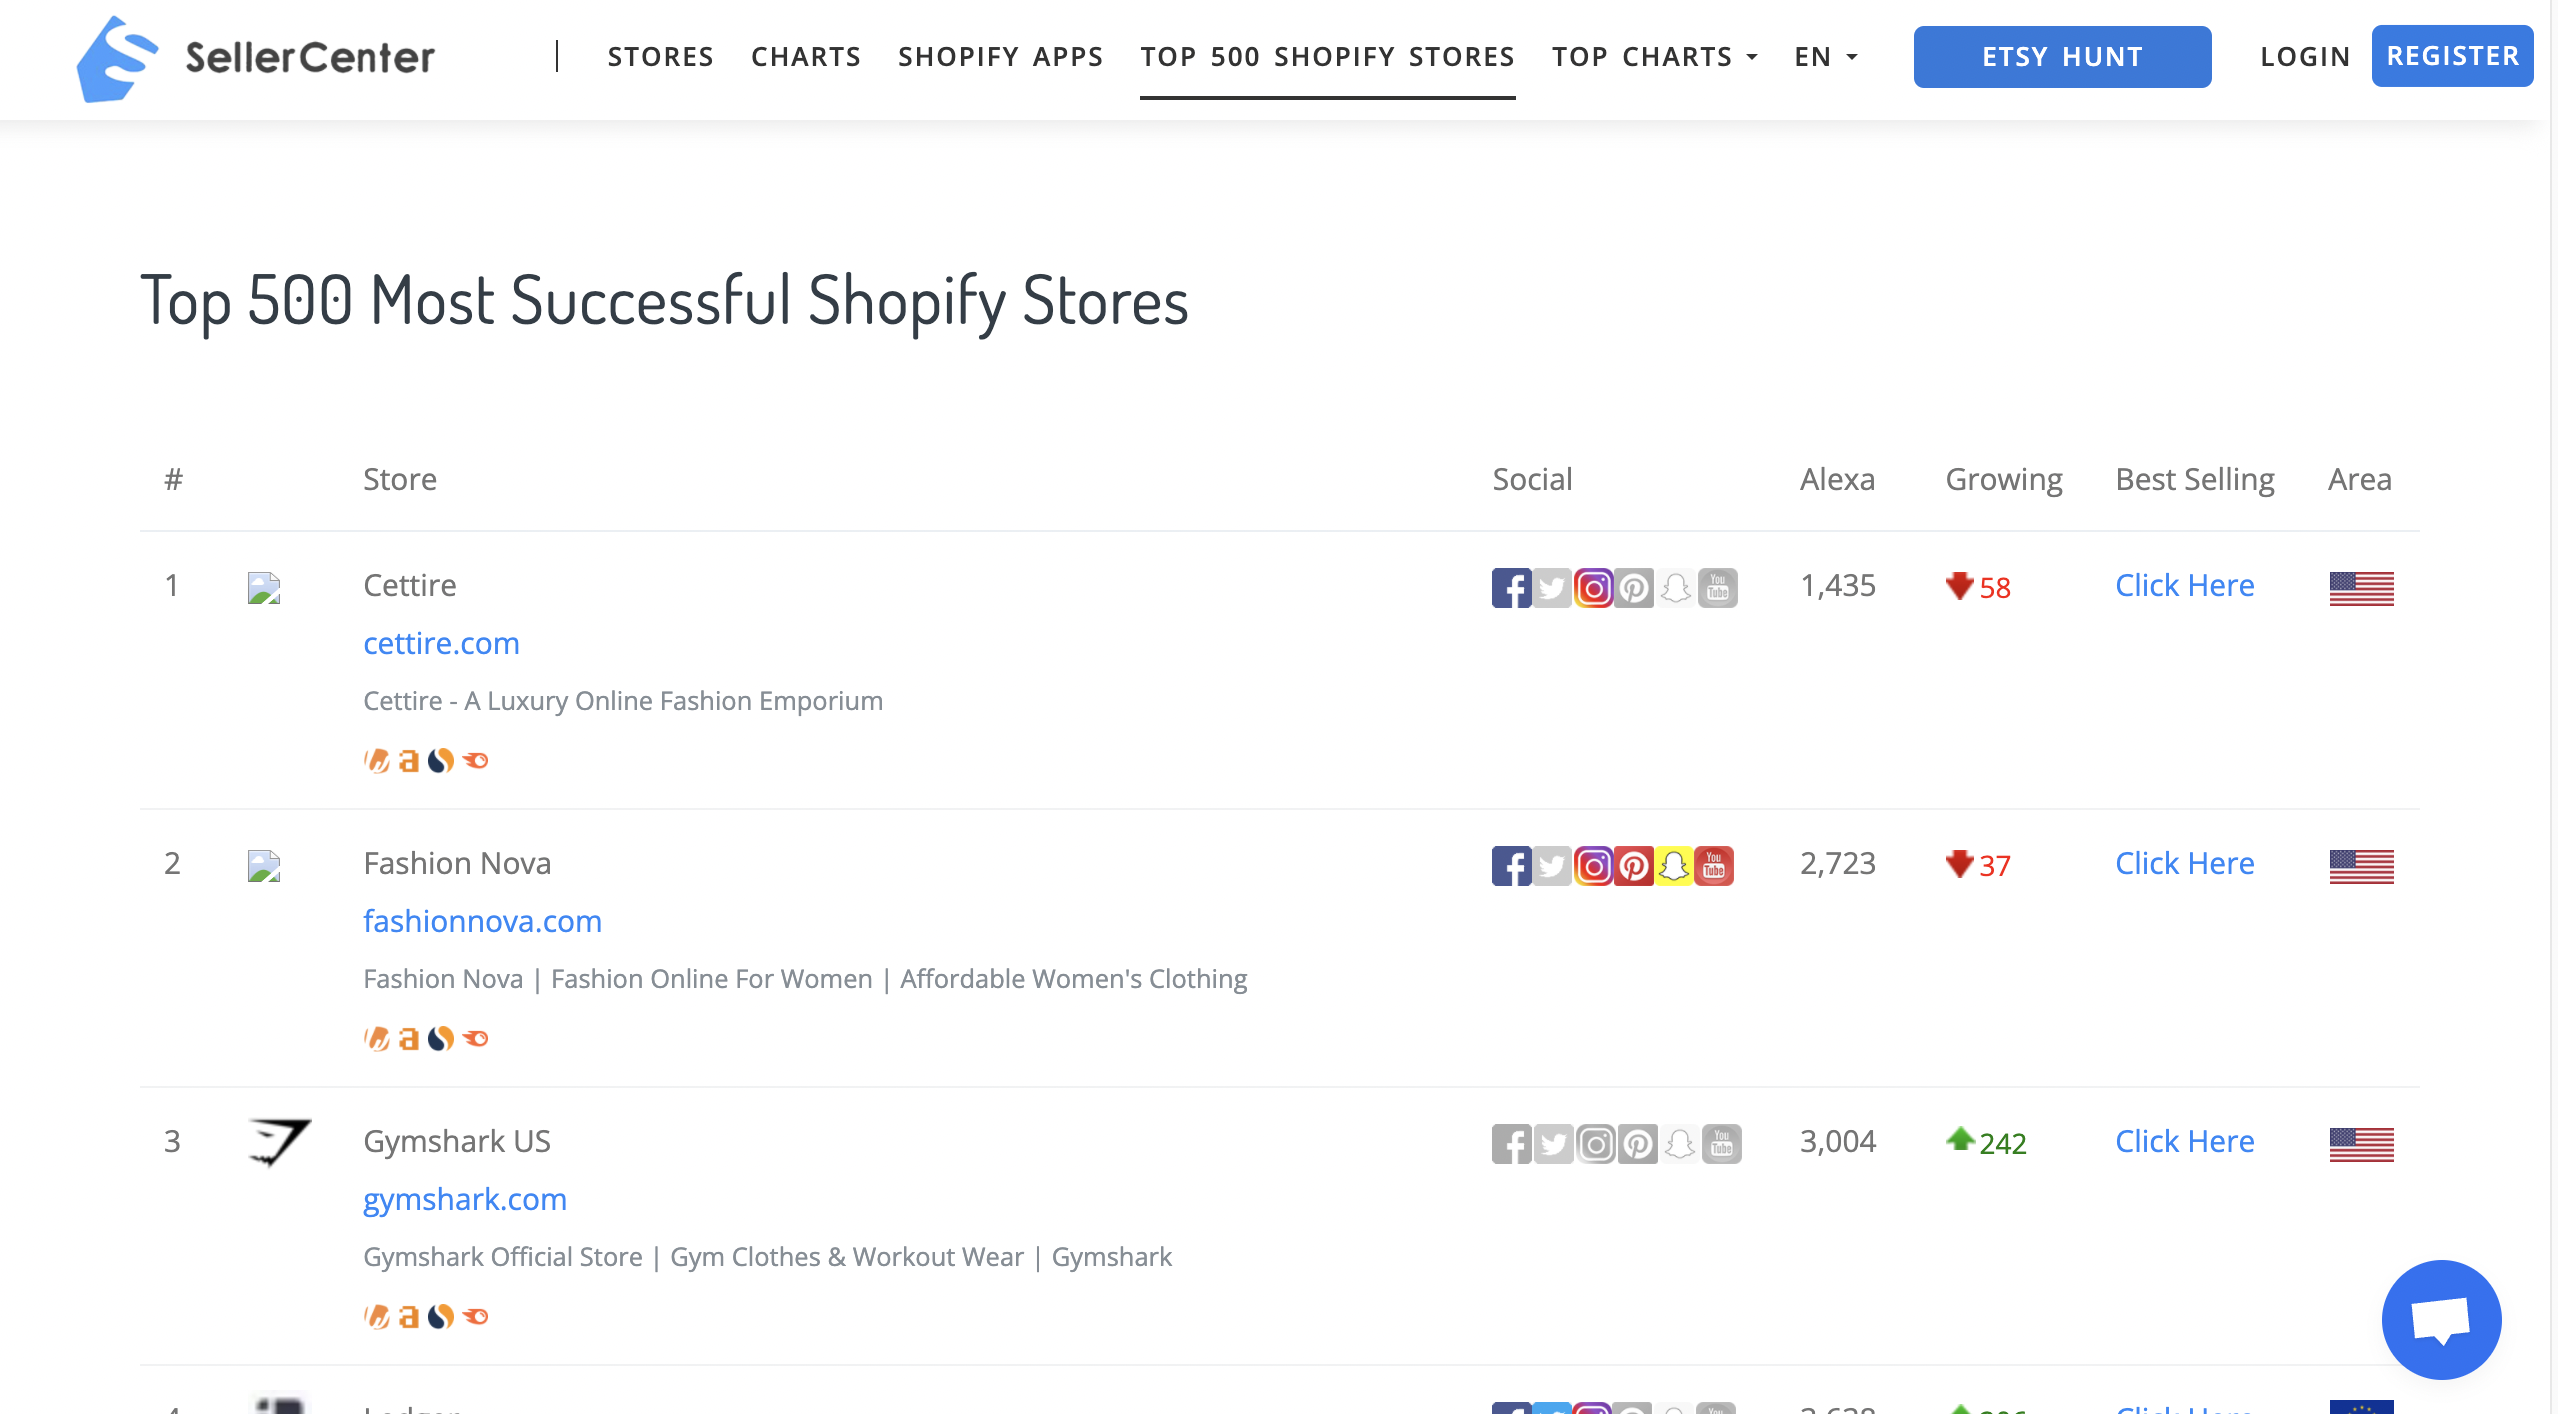 Discover New Trends & High Potential Products on Shopify